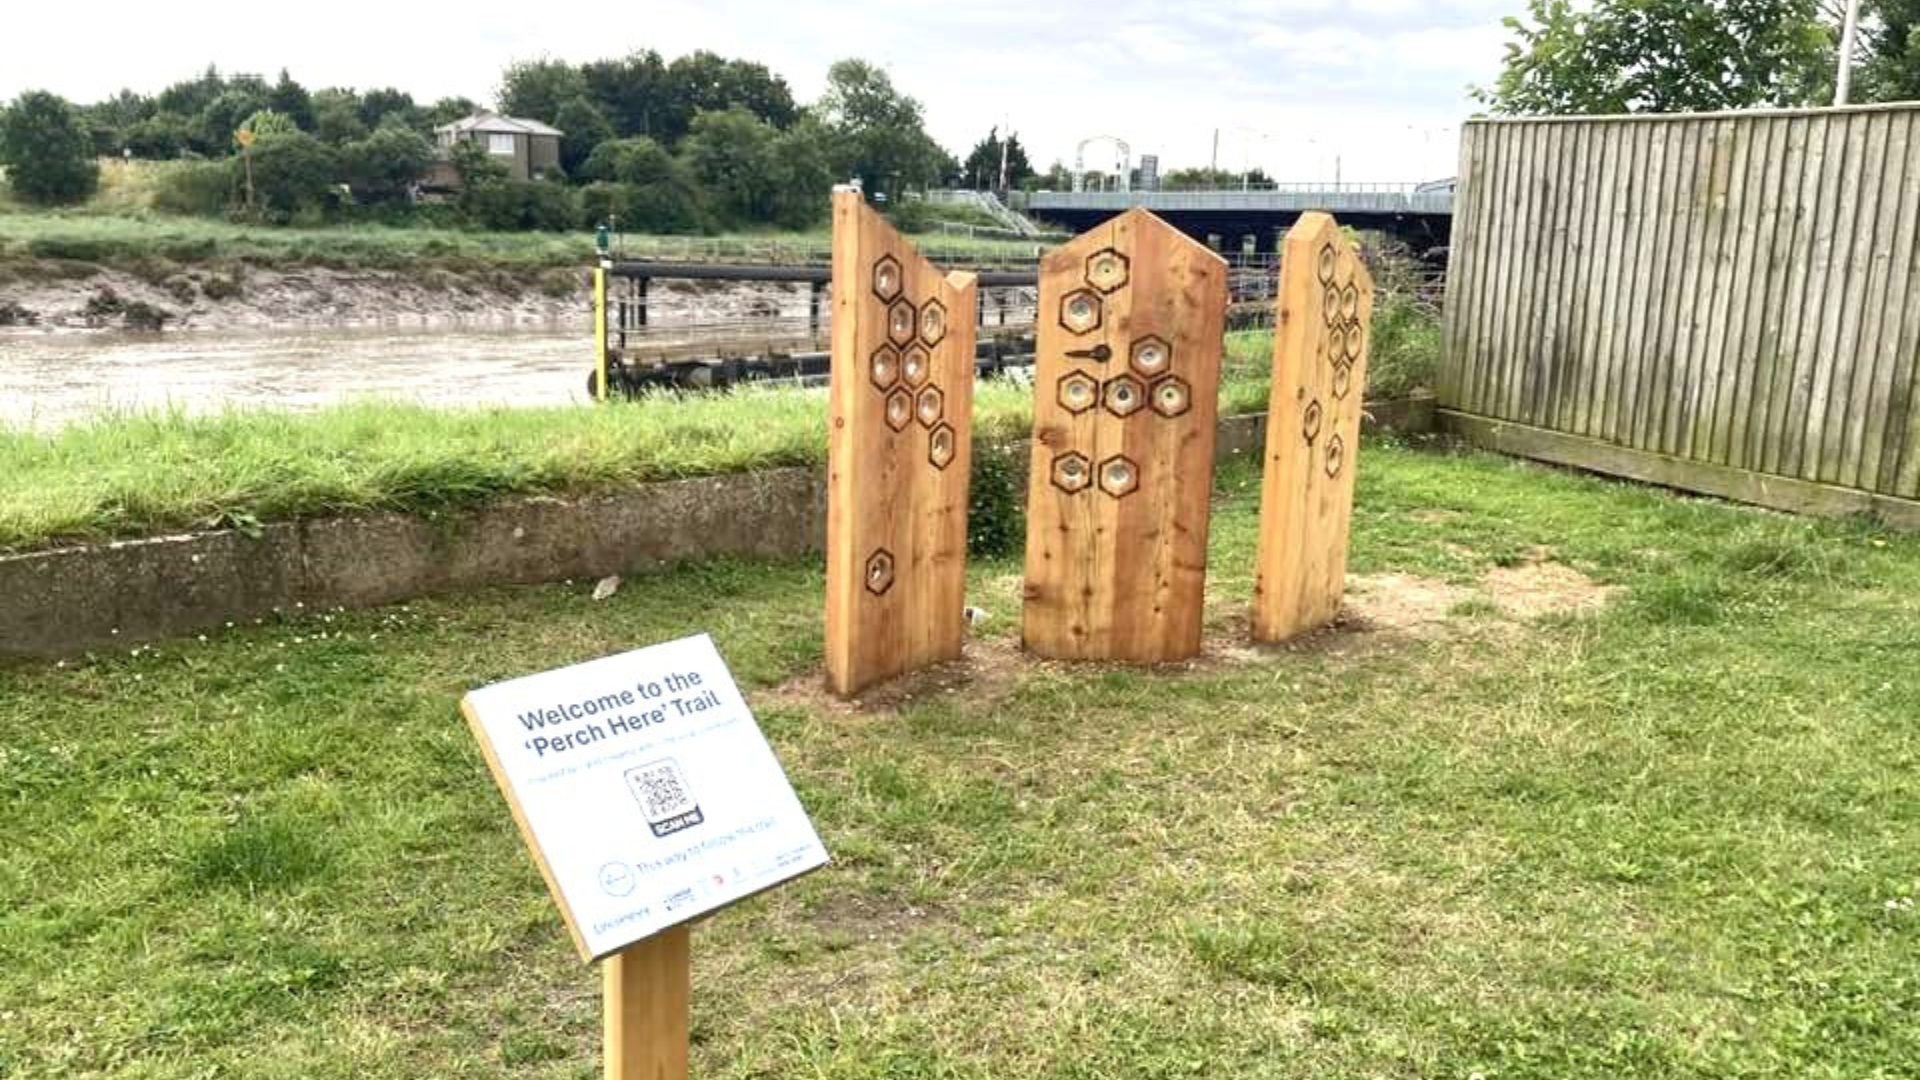 One of the installations alongside the riverside.